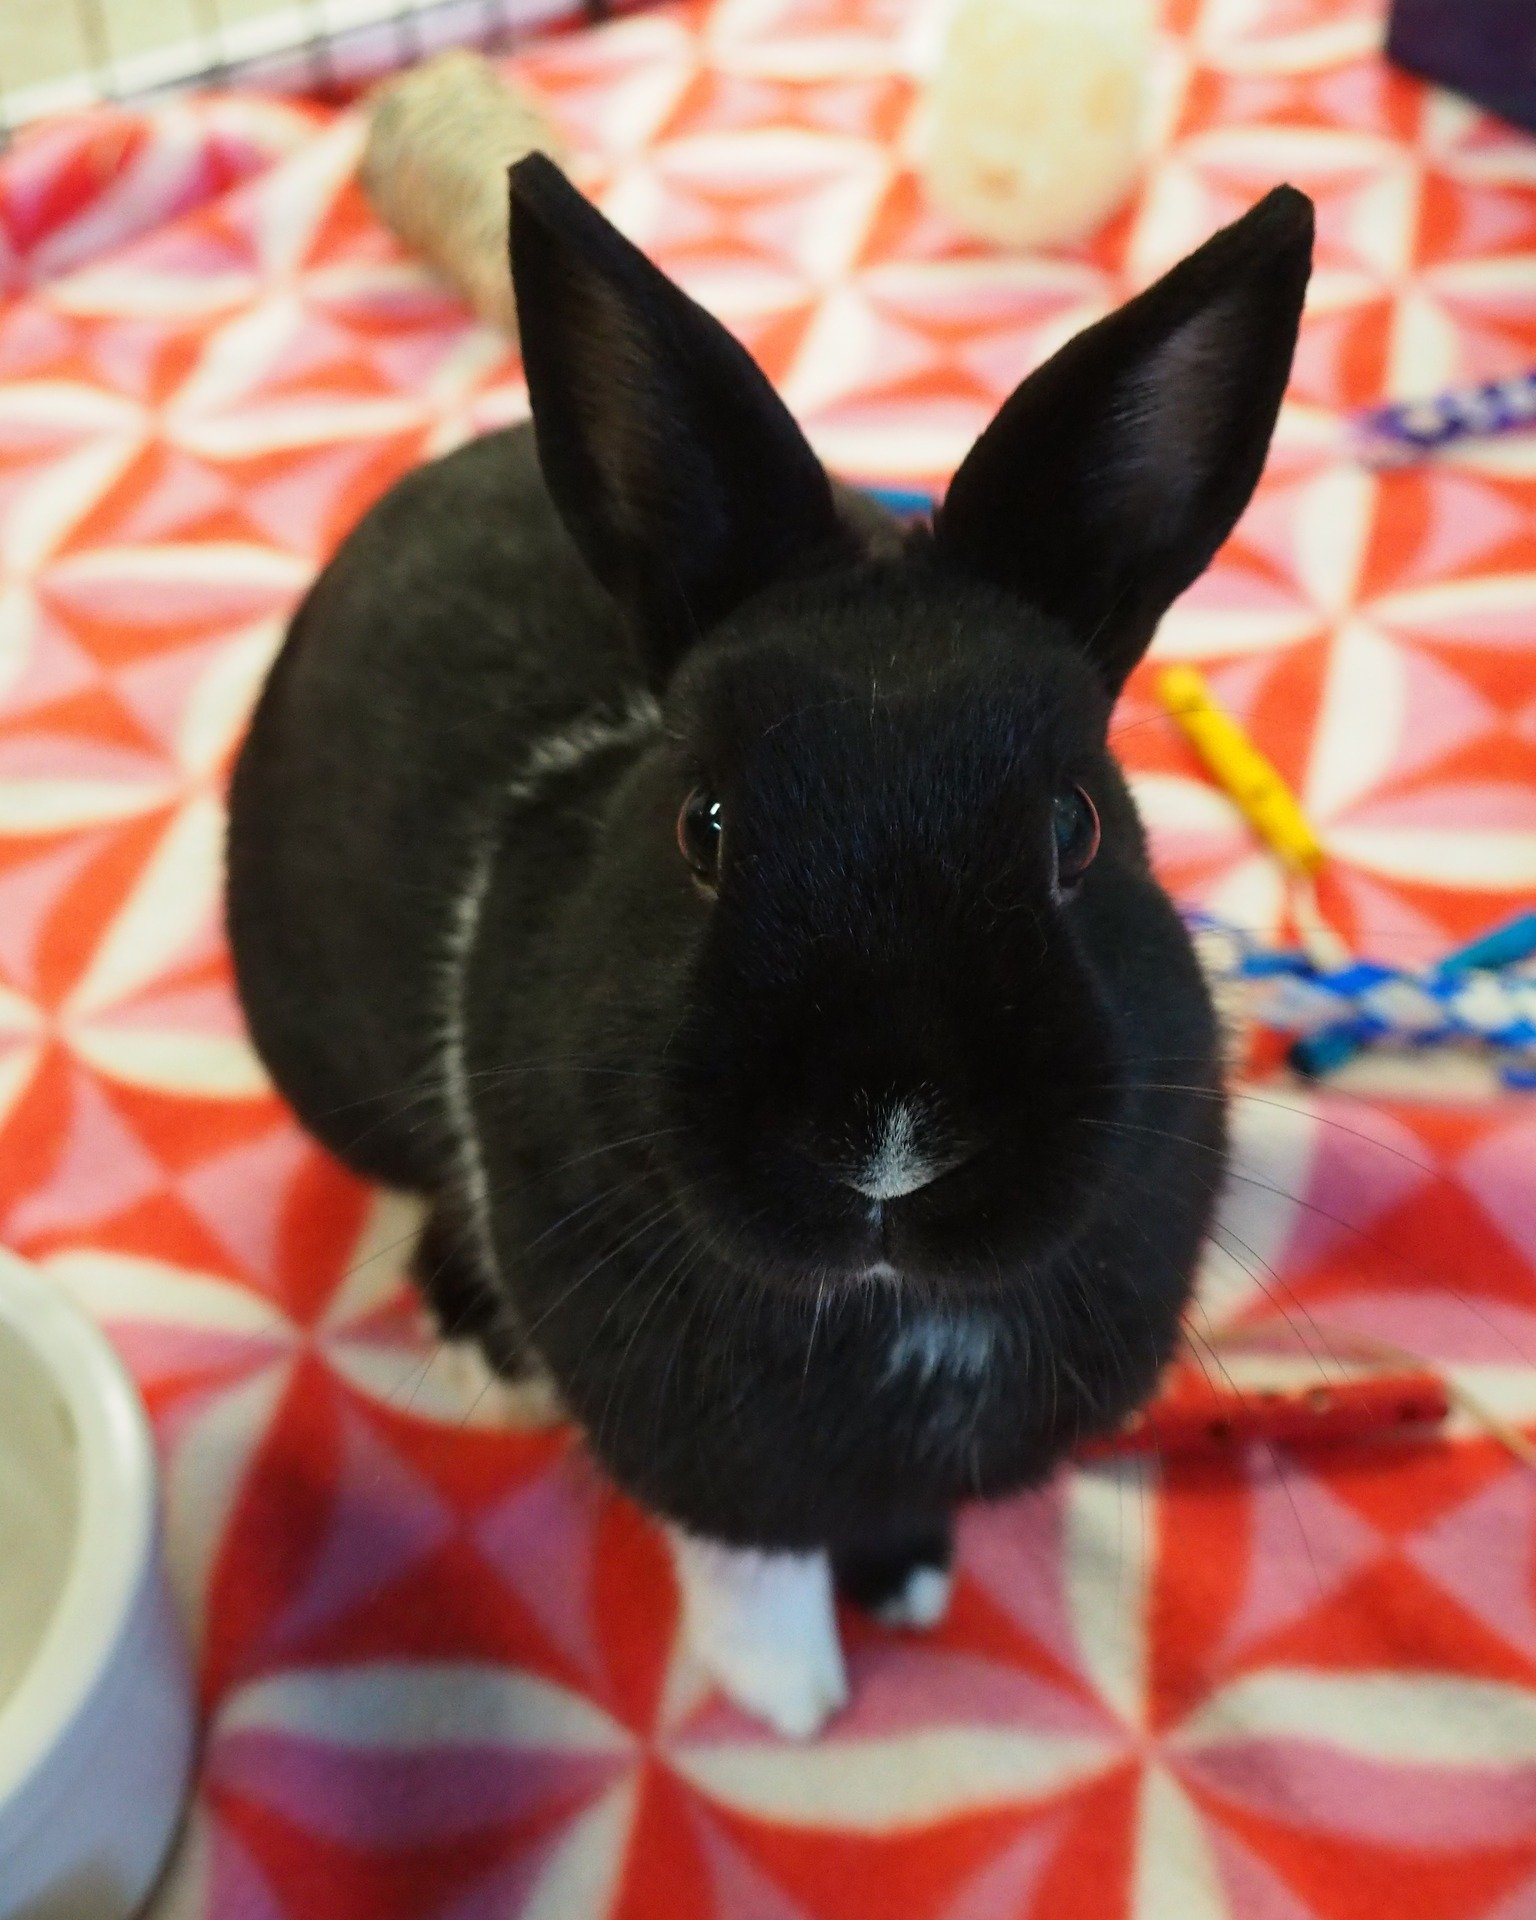 Only one week away, May 4, from the Spring Fling silent auction.  This is your chance to help the bunnies while getting more bunny related items.  https://paybee.io/quickpay.html?handle=sdrabbits&amp;ppid=13#optionList